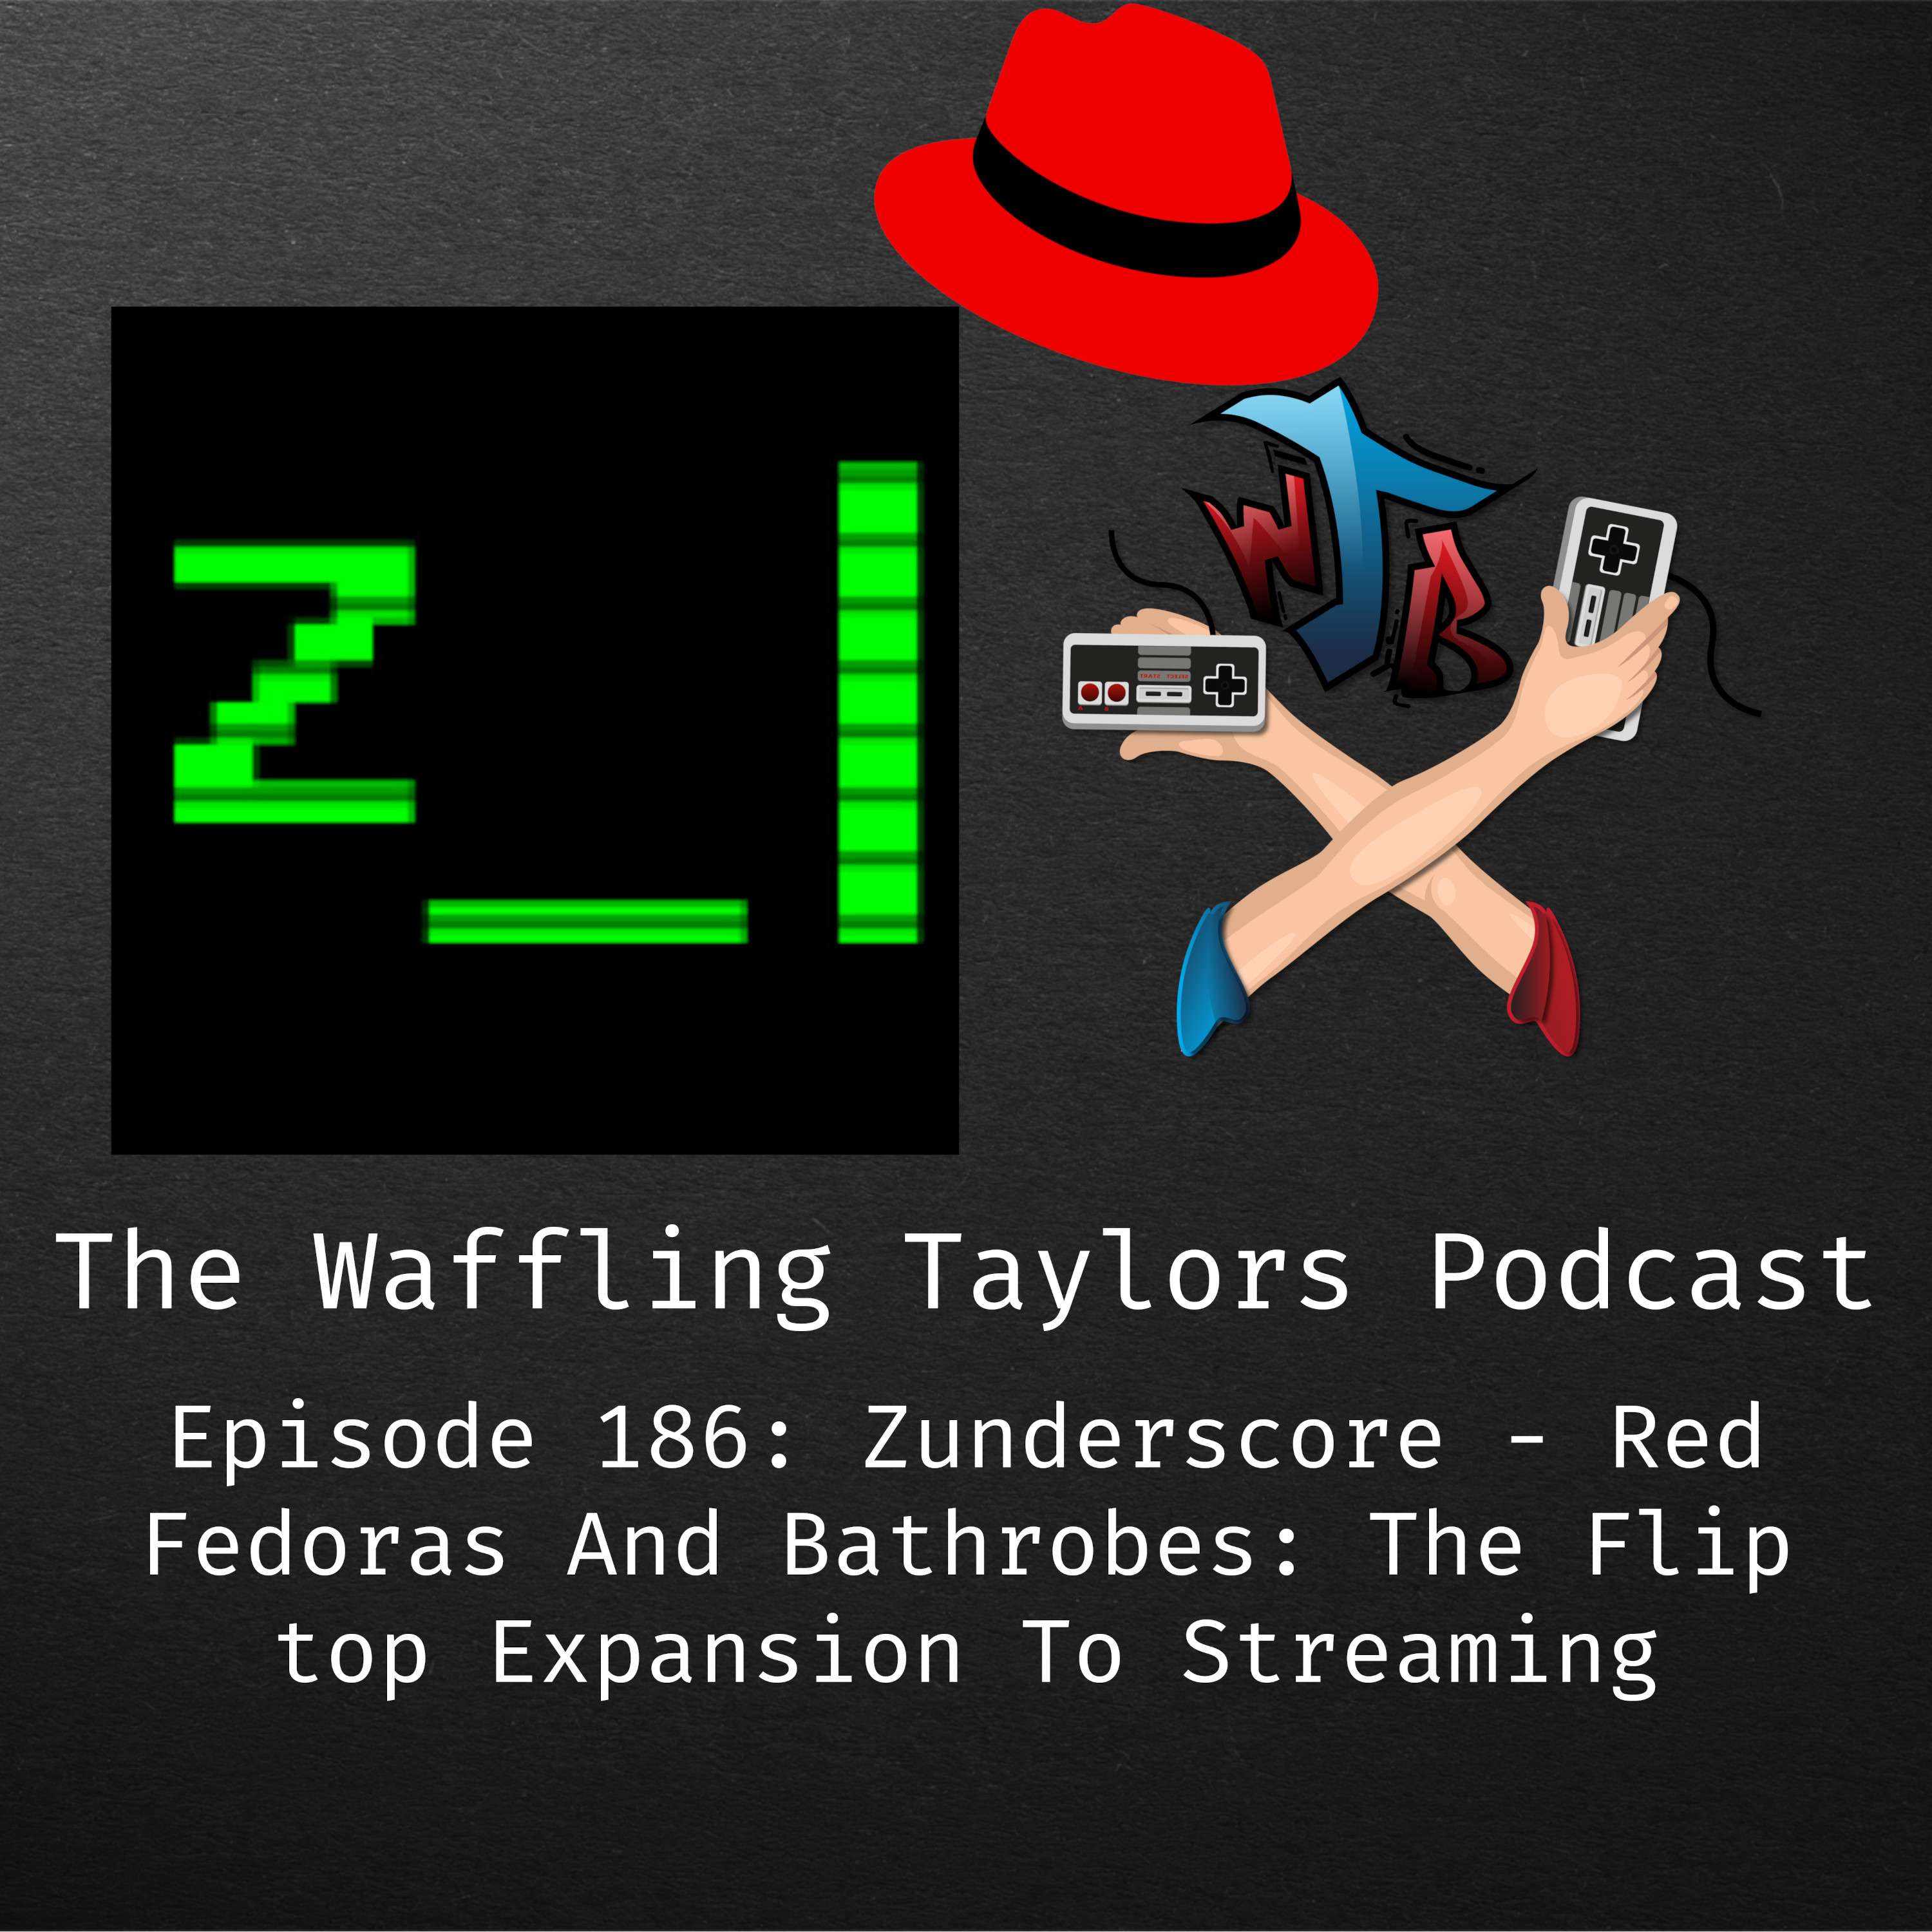 Zunderscore - Red Fedoras And Bathrobes: The Flip top Expansion To Streaming